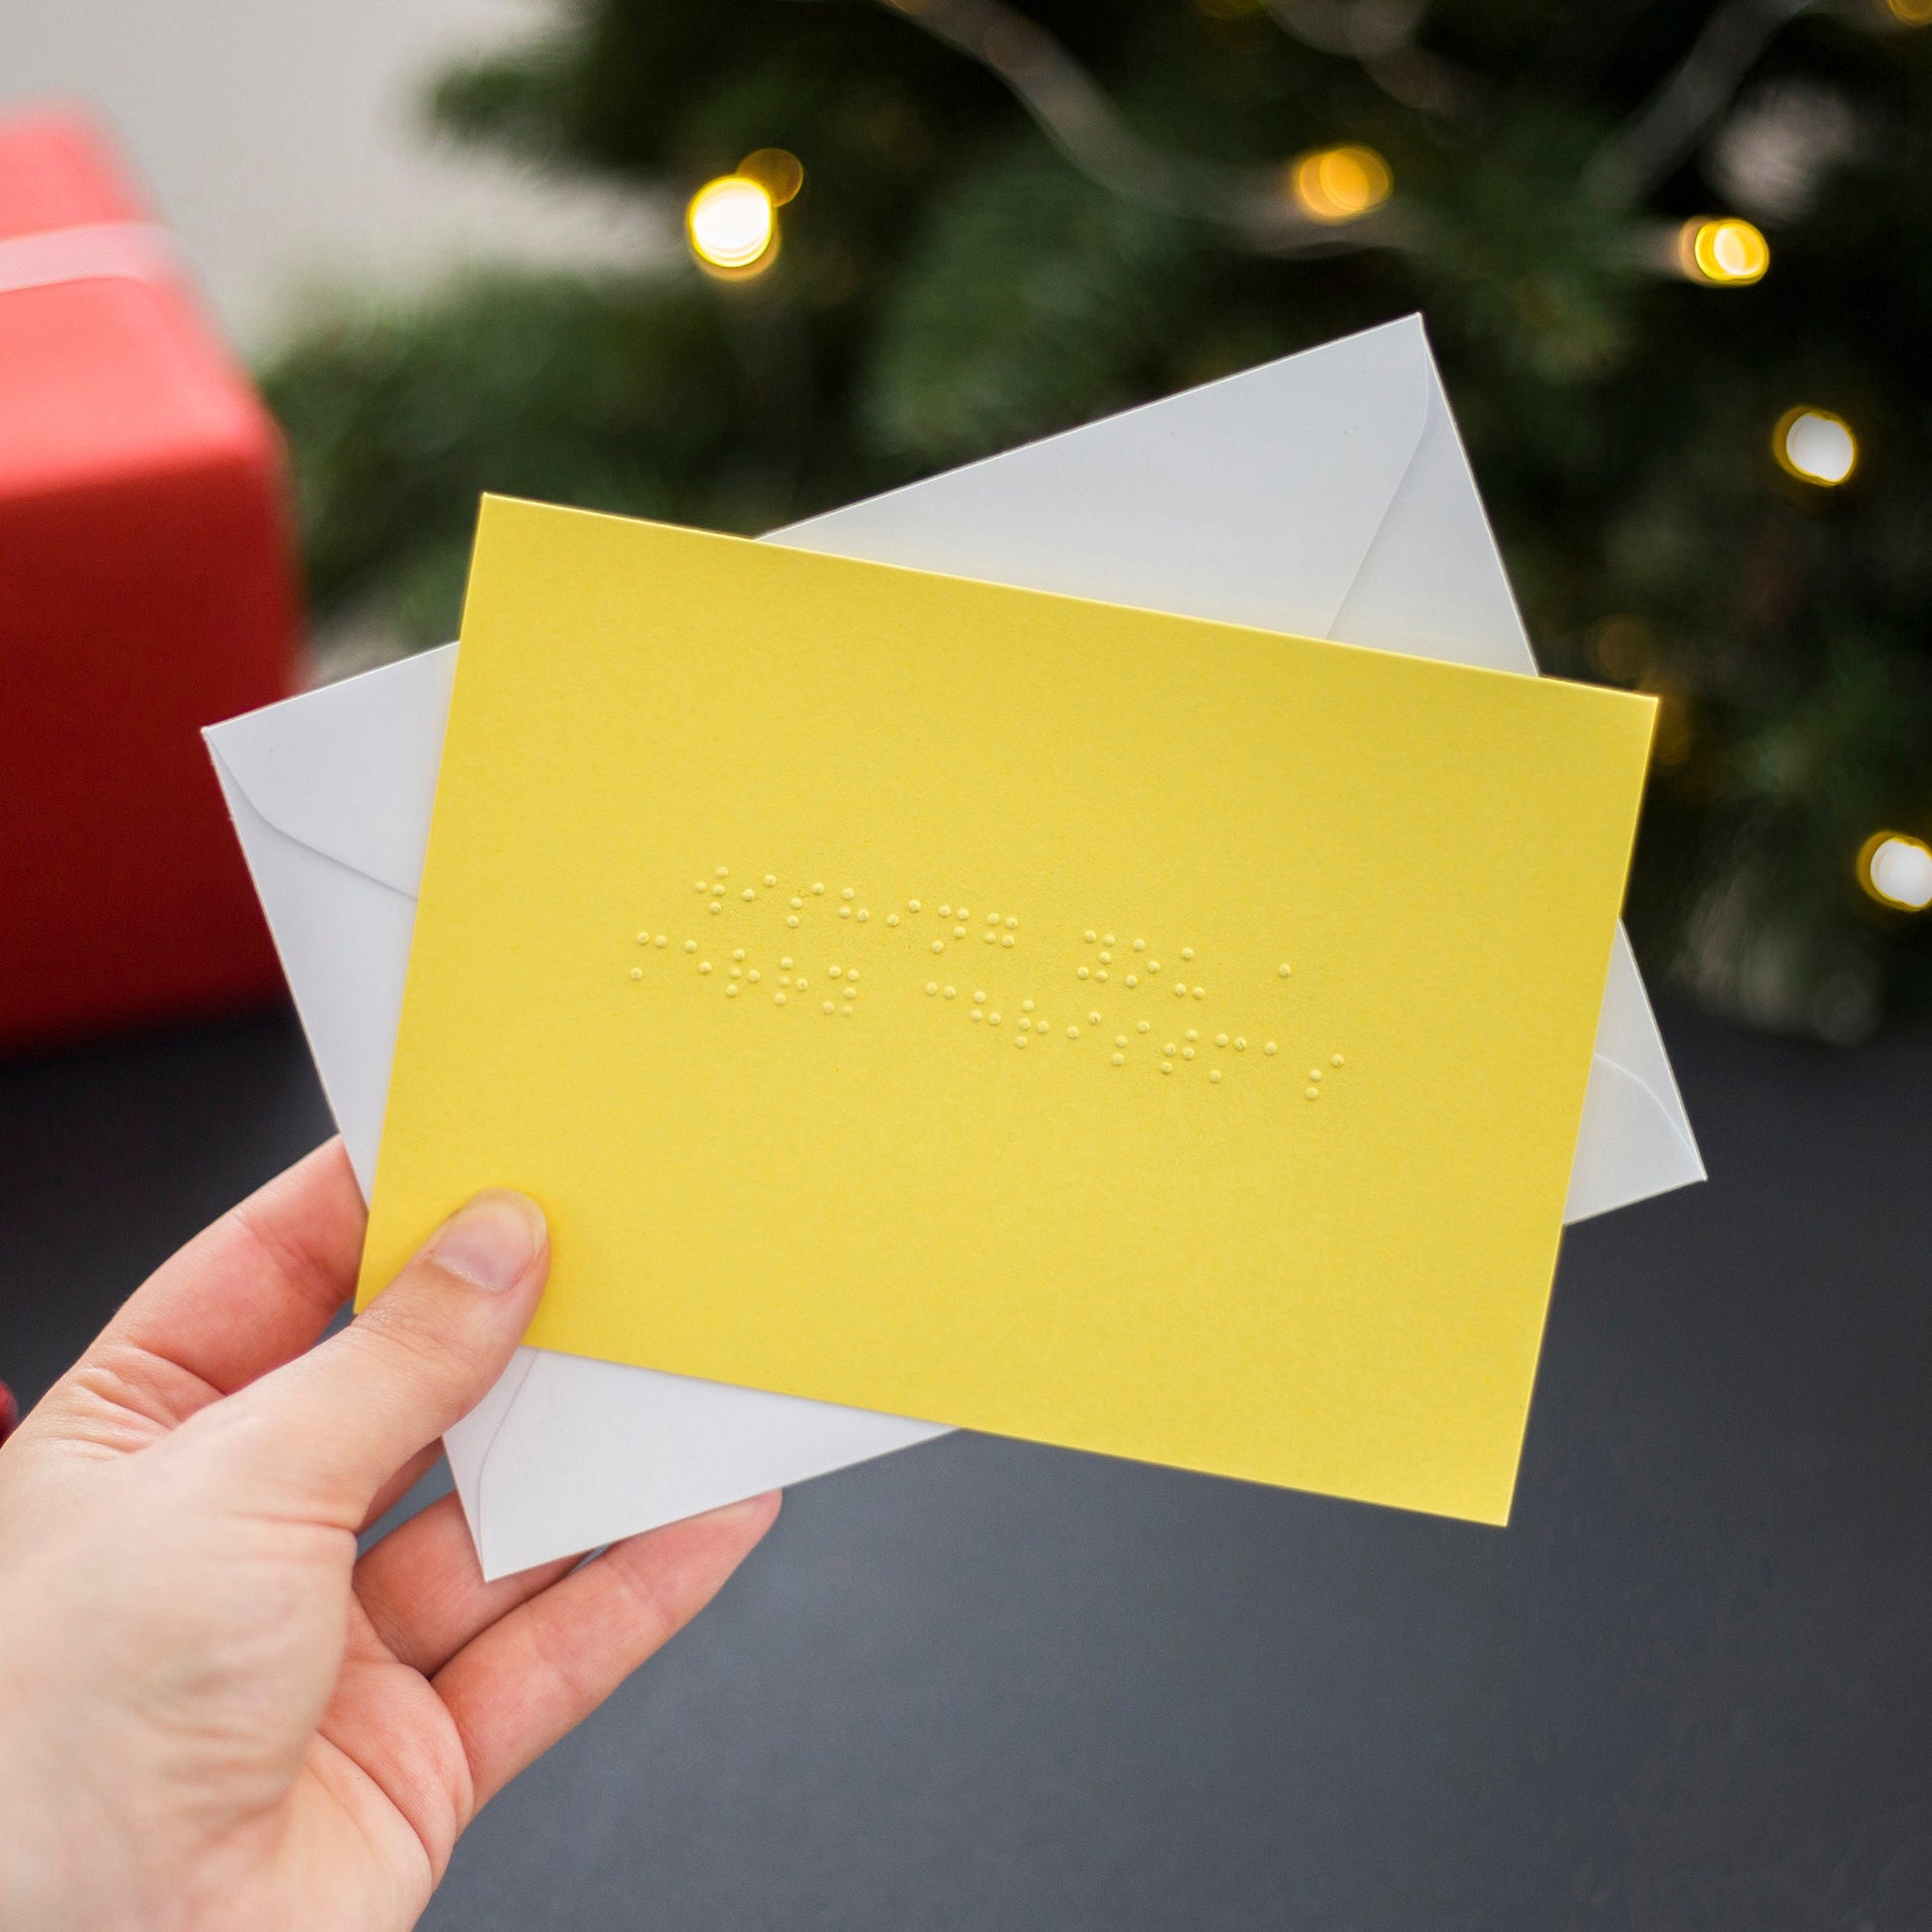 A hand holding a yellow braille Christmas card saying Wishing You A Merry Christmas written in lower case UEB.